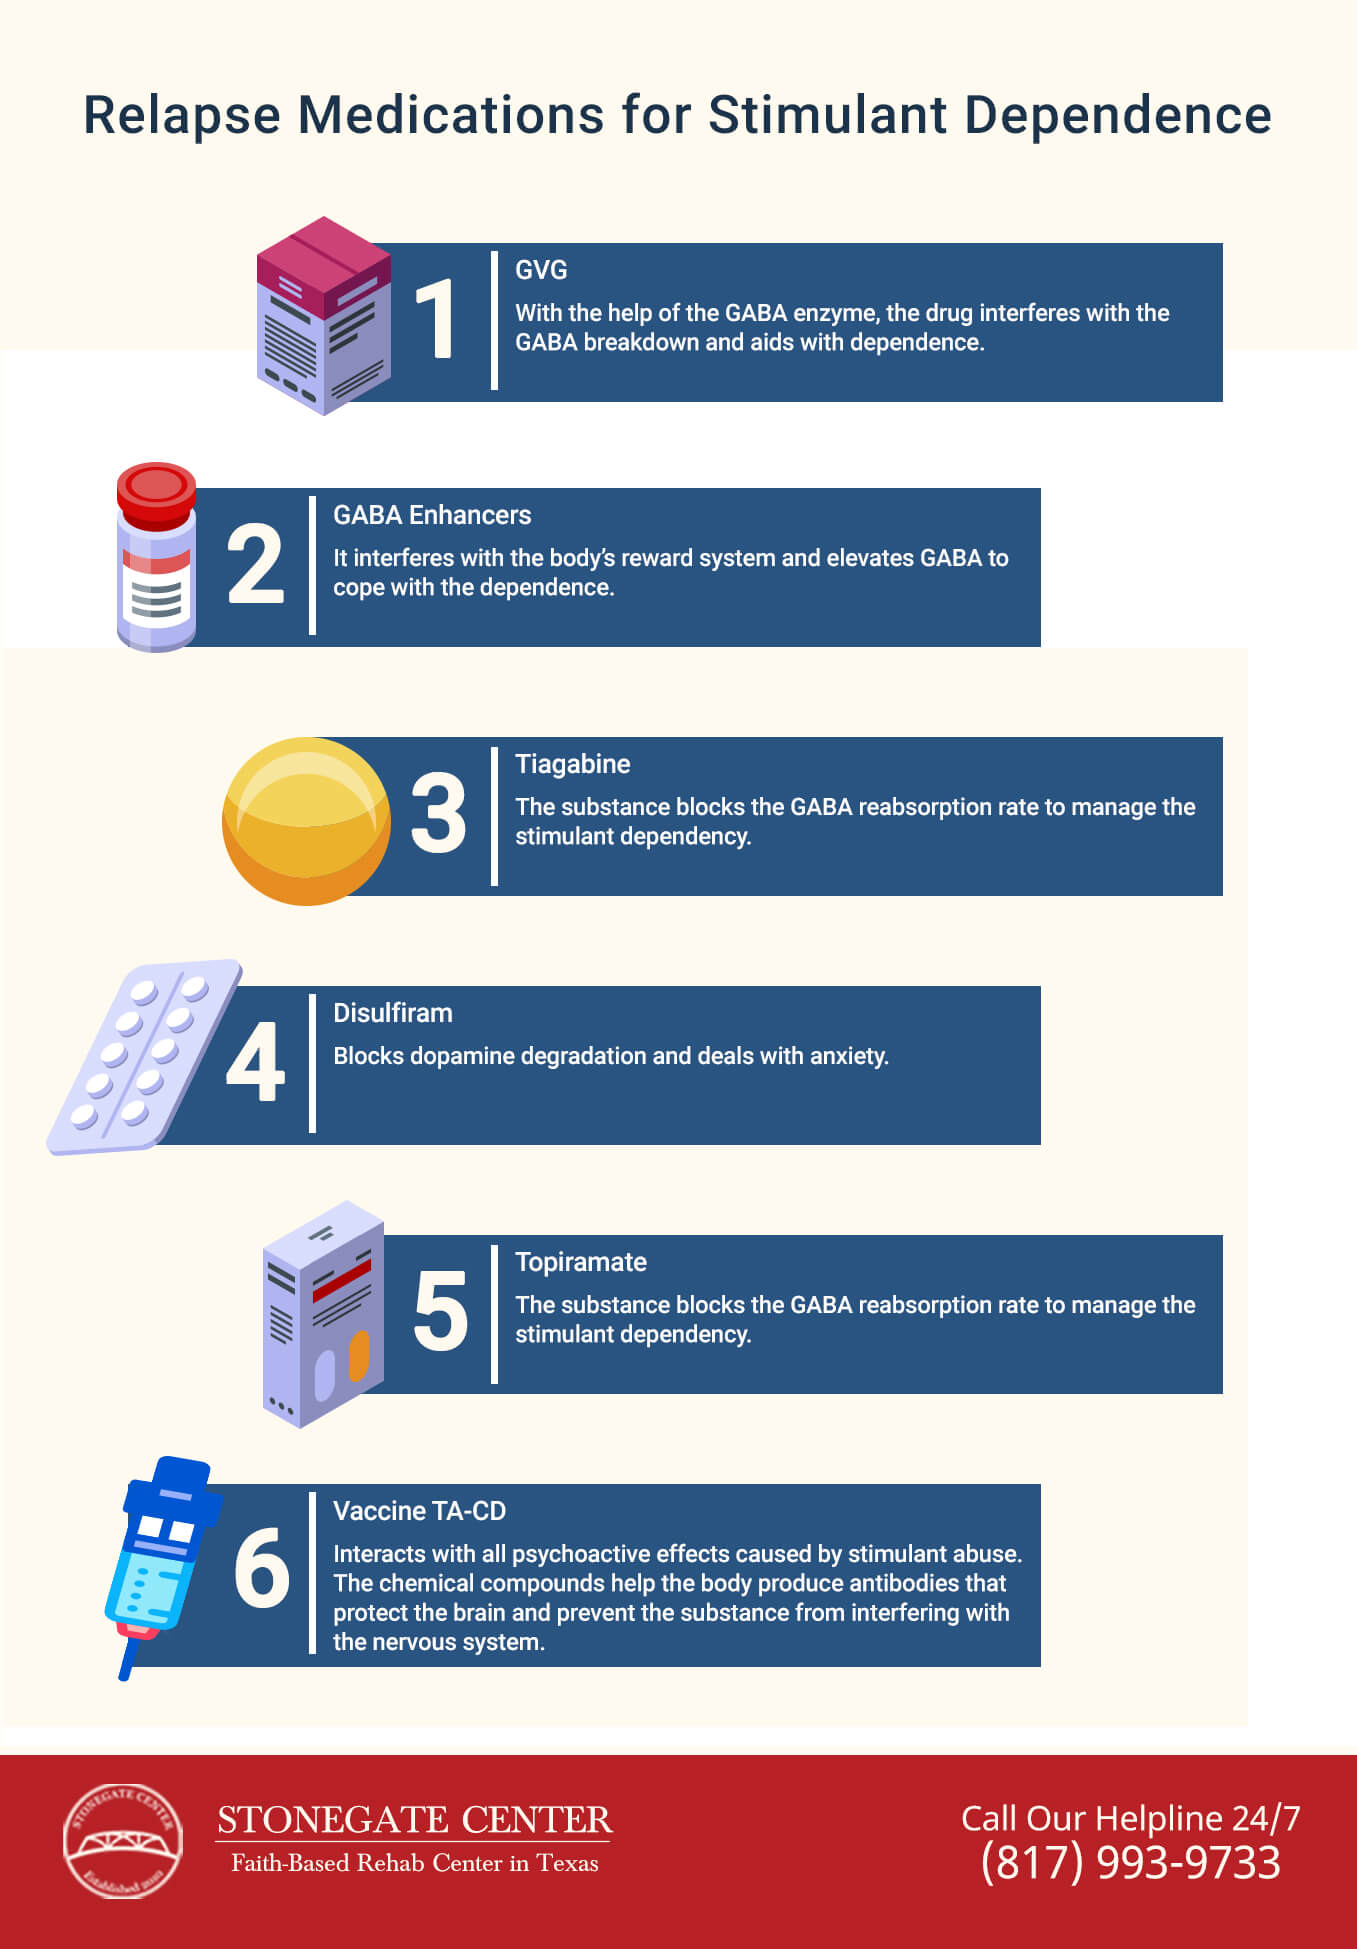 Stonegate Center Blog - Promising Medications to Treat Stimulant Dependence - Relapse Medications Infographics